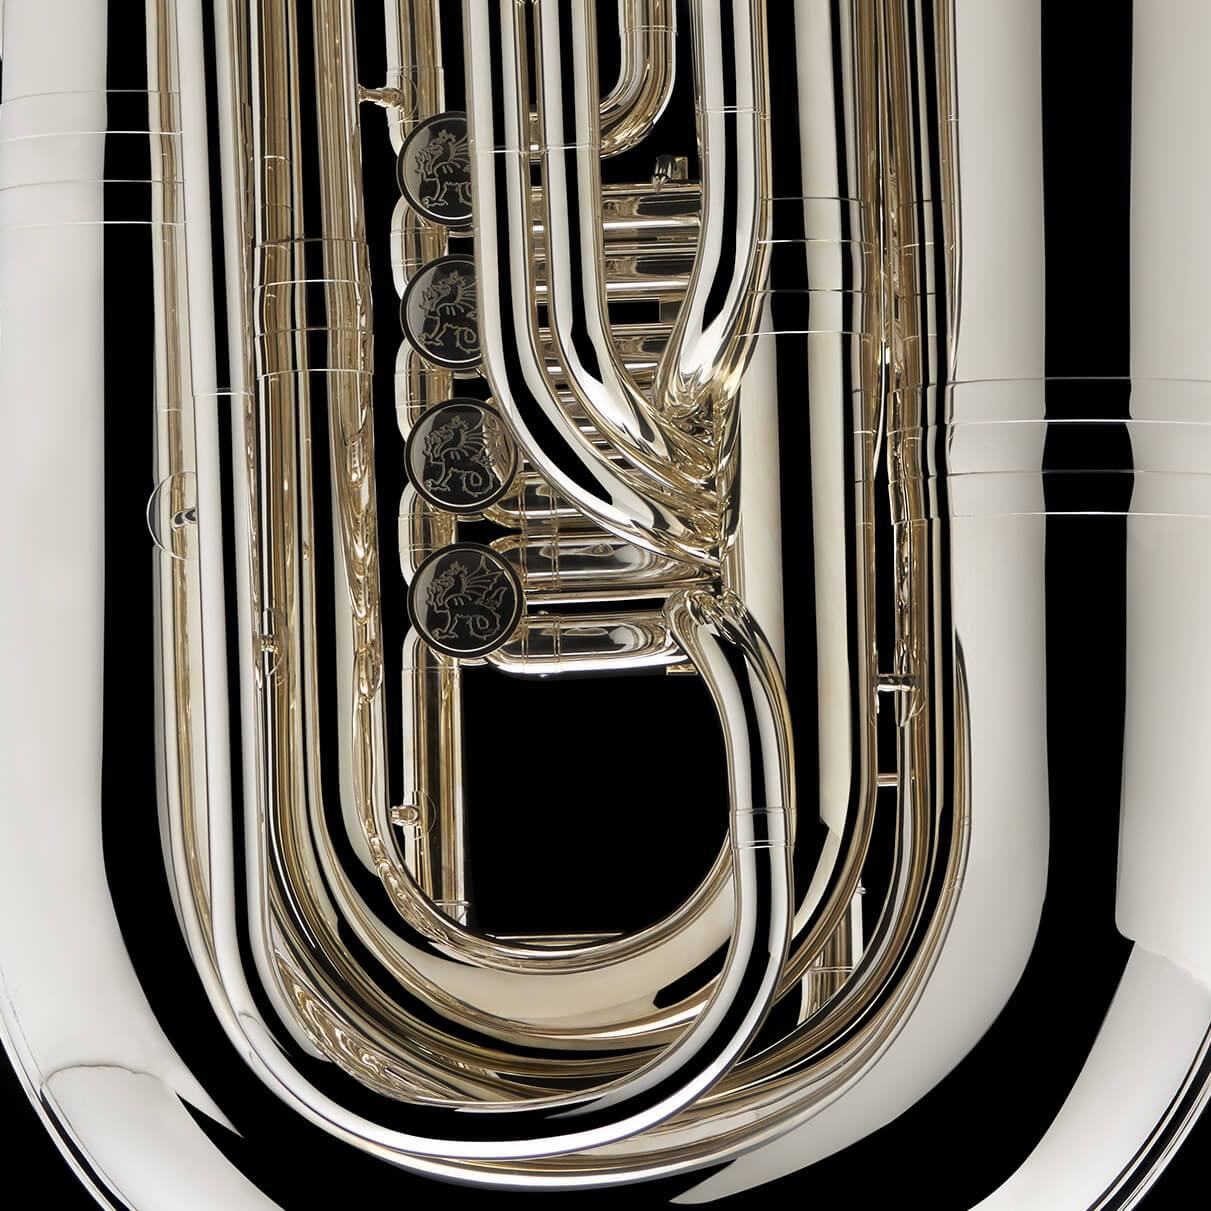 A close up image showing the detailed engravings on the valves of a BBb 6/4 Rotary tuba ‘Kaiser’ from Wessex Tubas